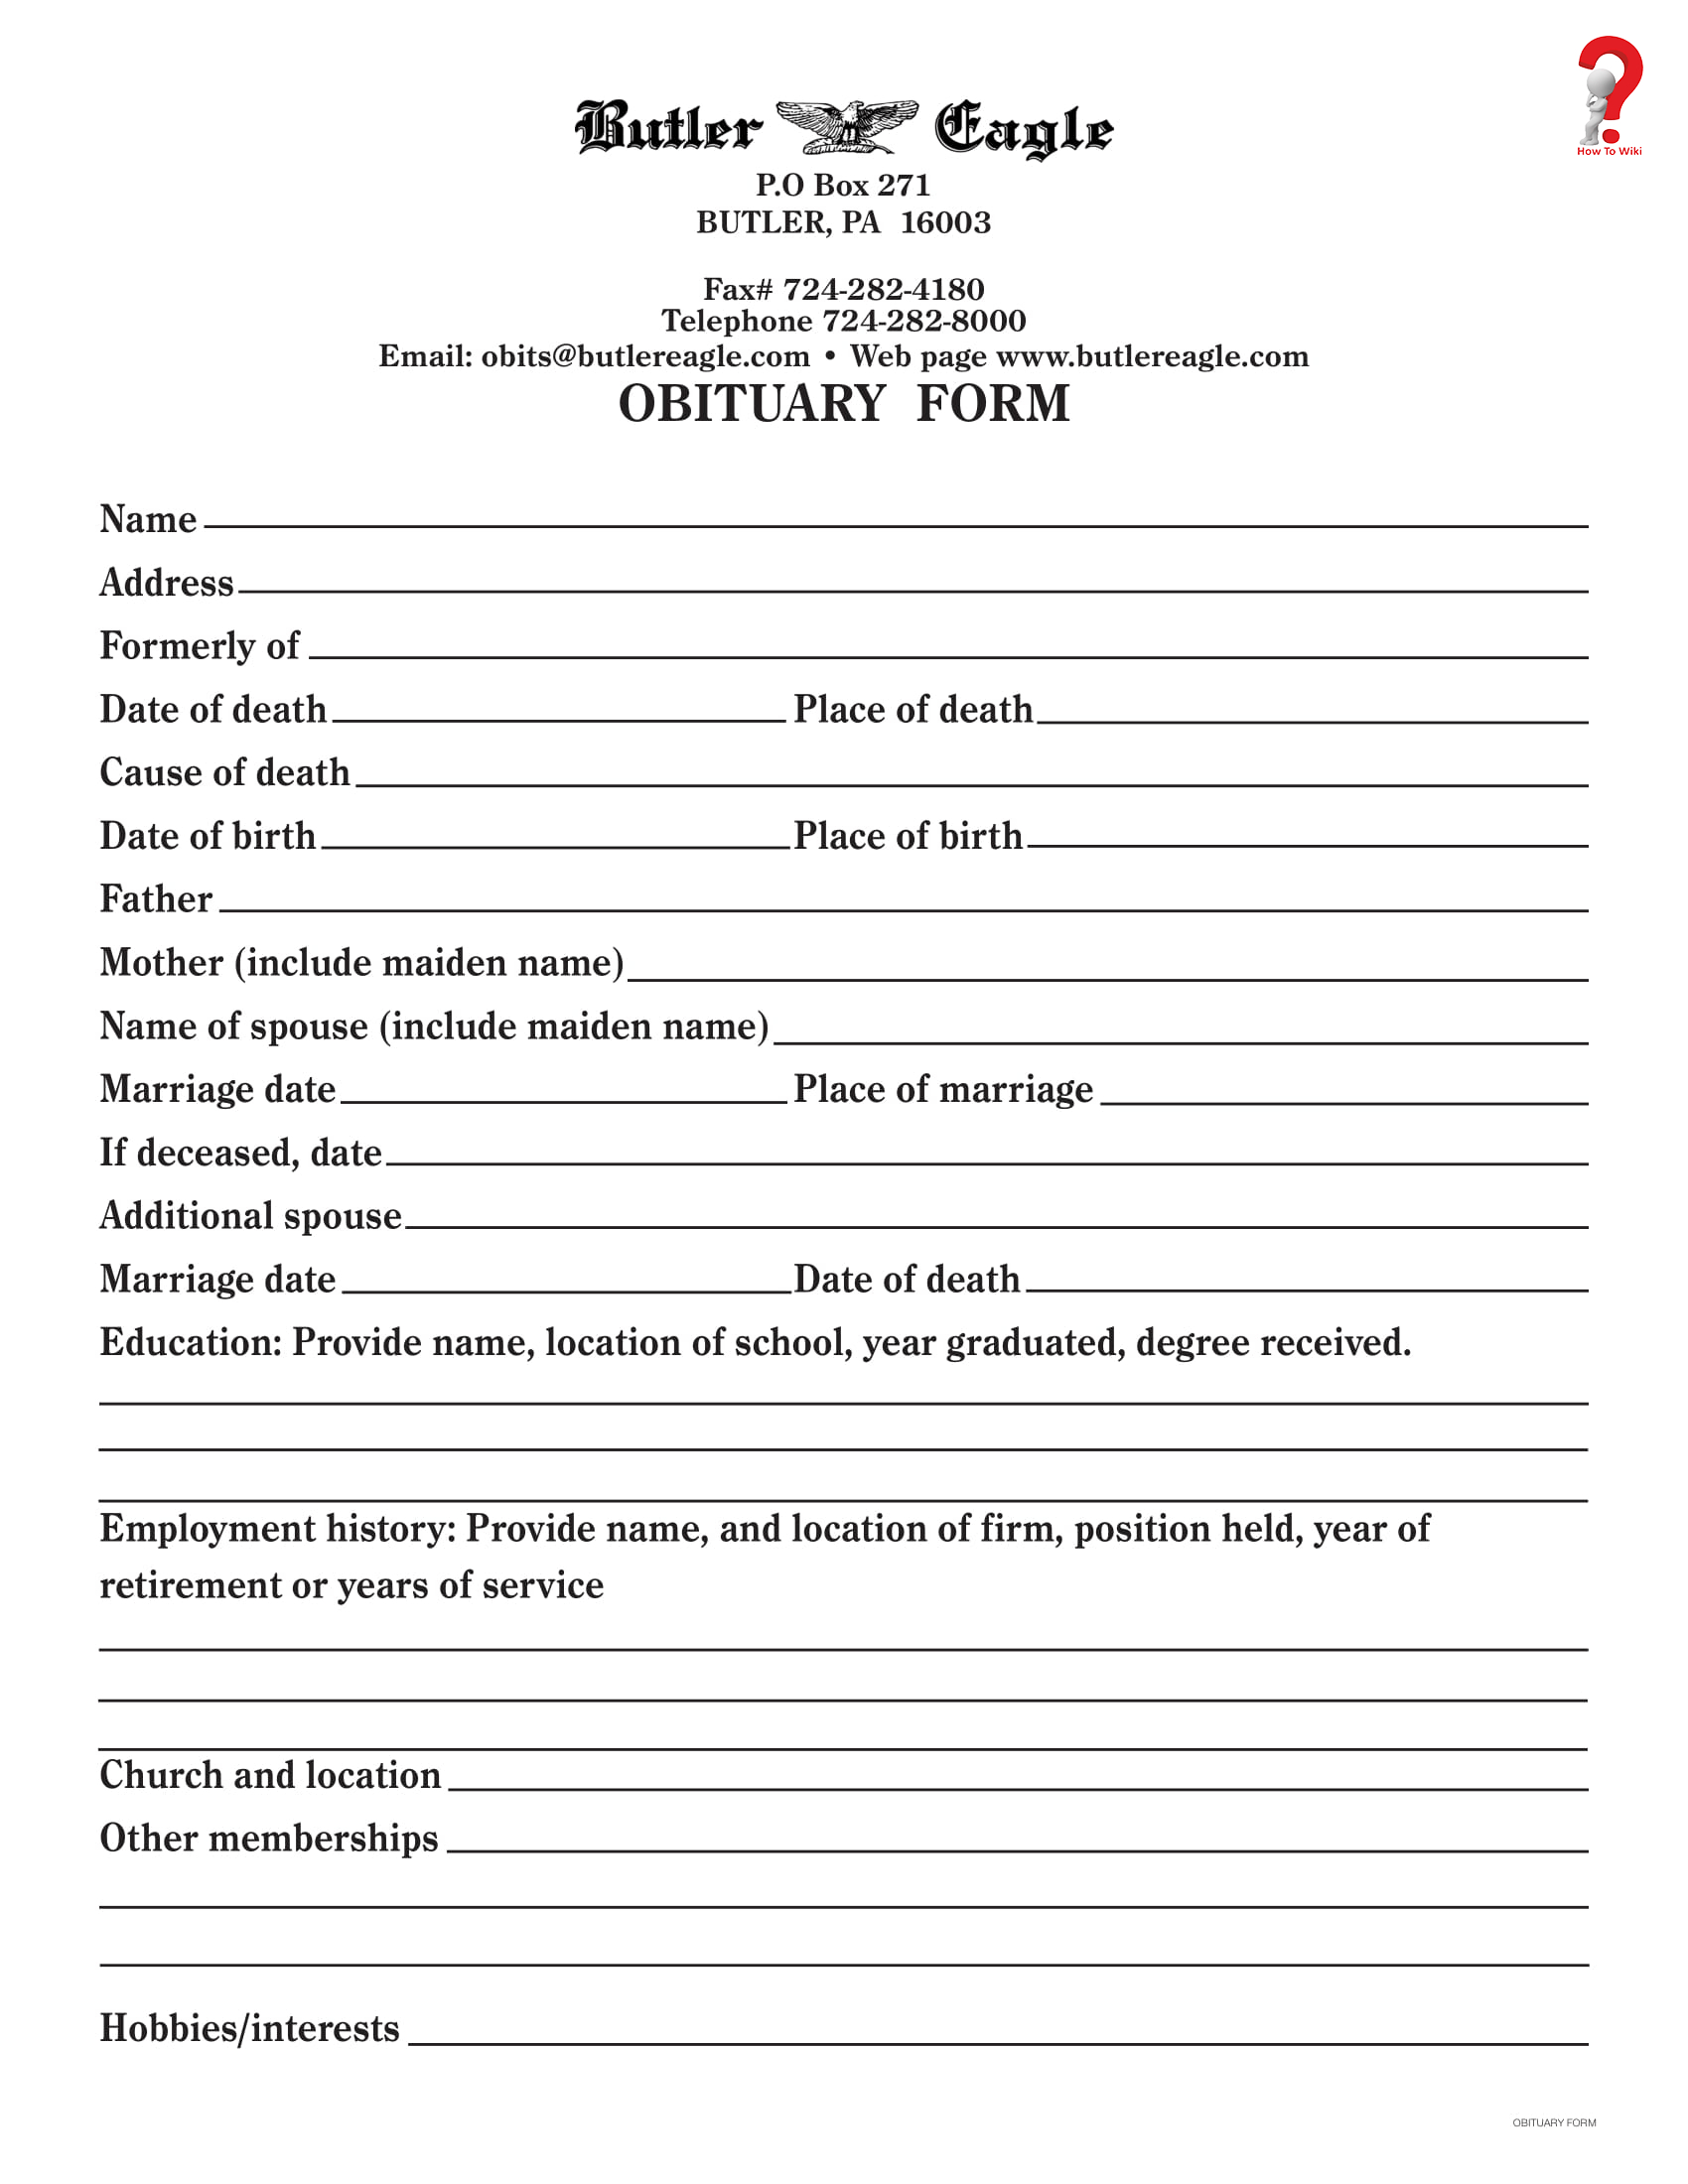 How To Write An Obituary Template In Simple Steps | How To Wiki With Fill In The Blank Obituary Template